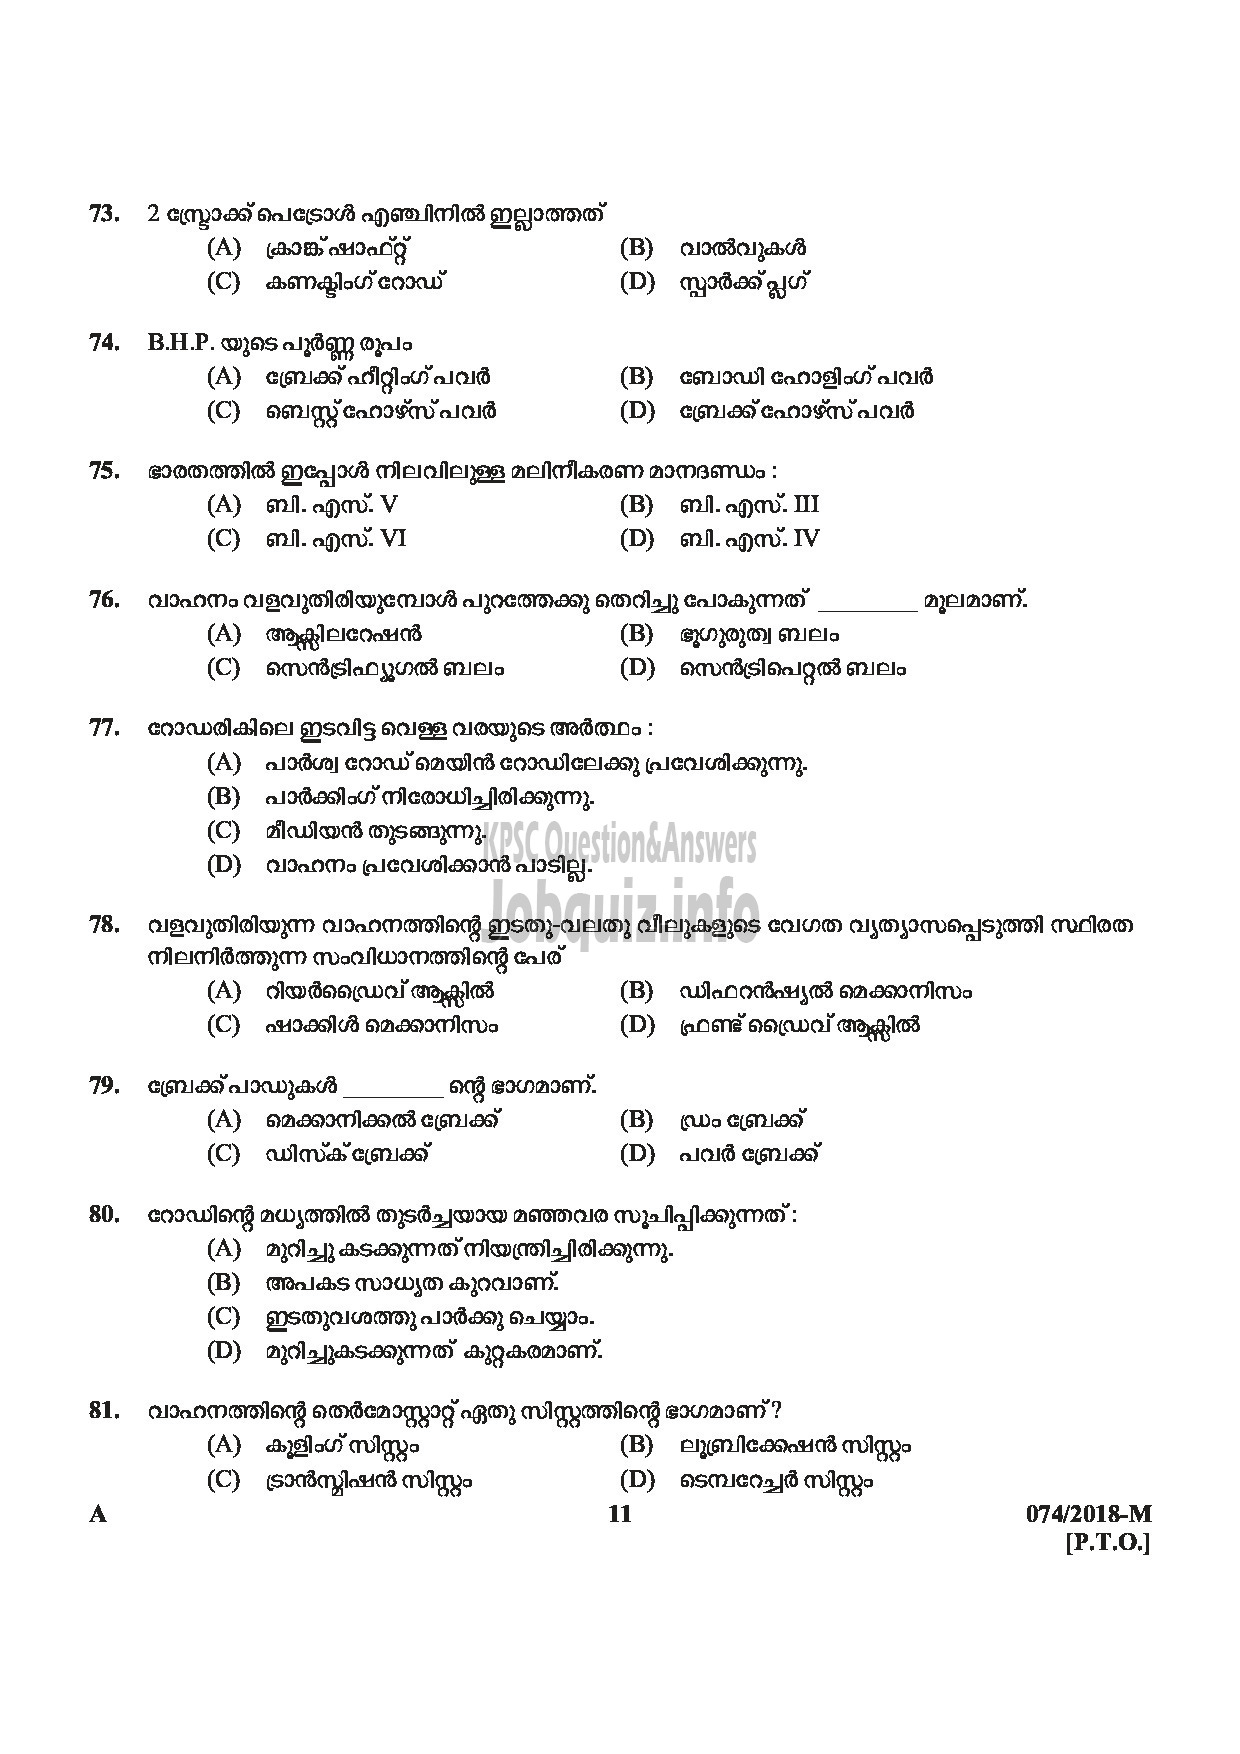 Kerala PSC Question Paper - POLICE CONSTABLE DRIVER ARMED POLICE BATTALION POLICE-11